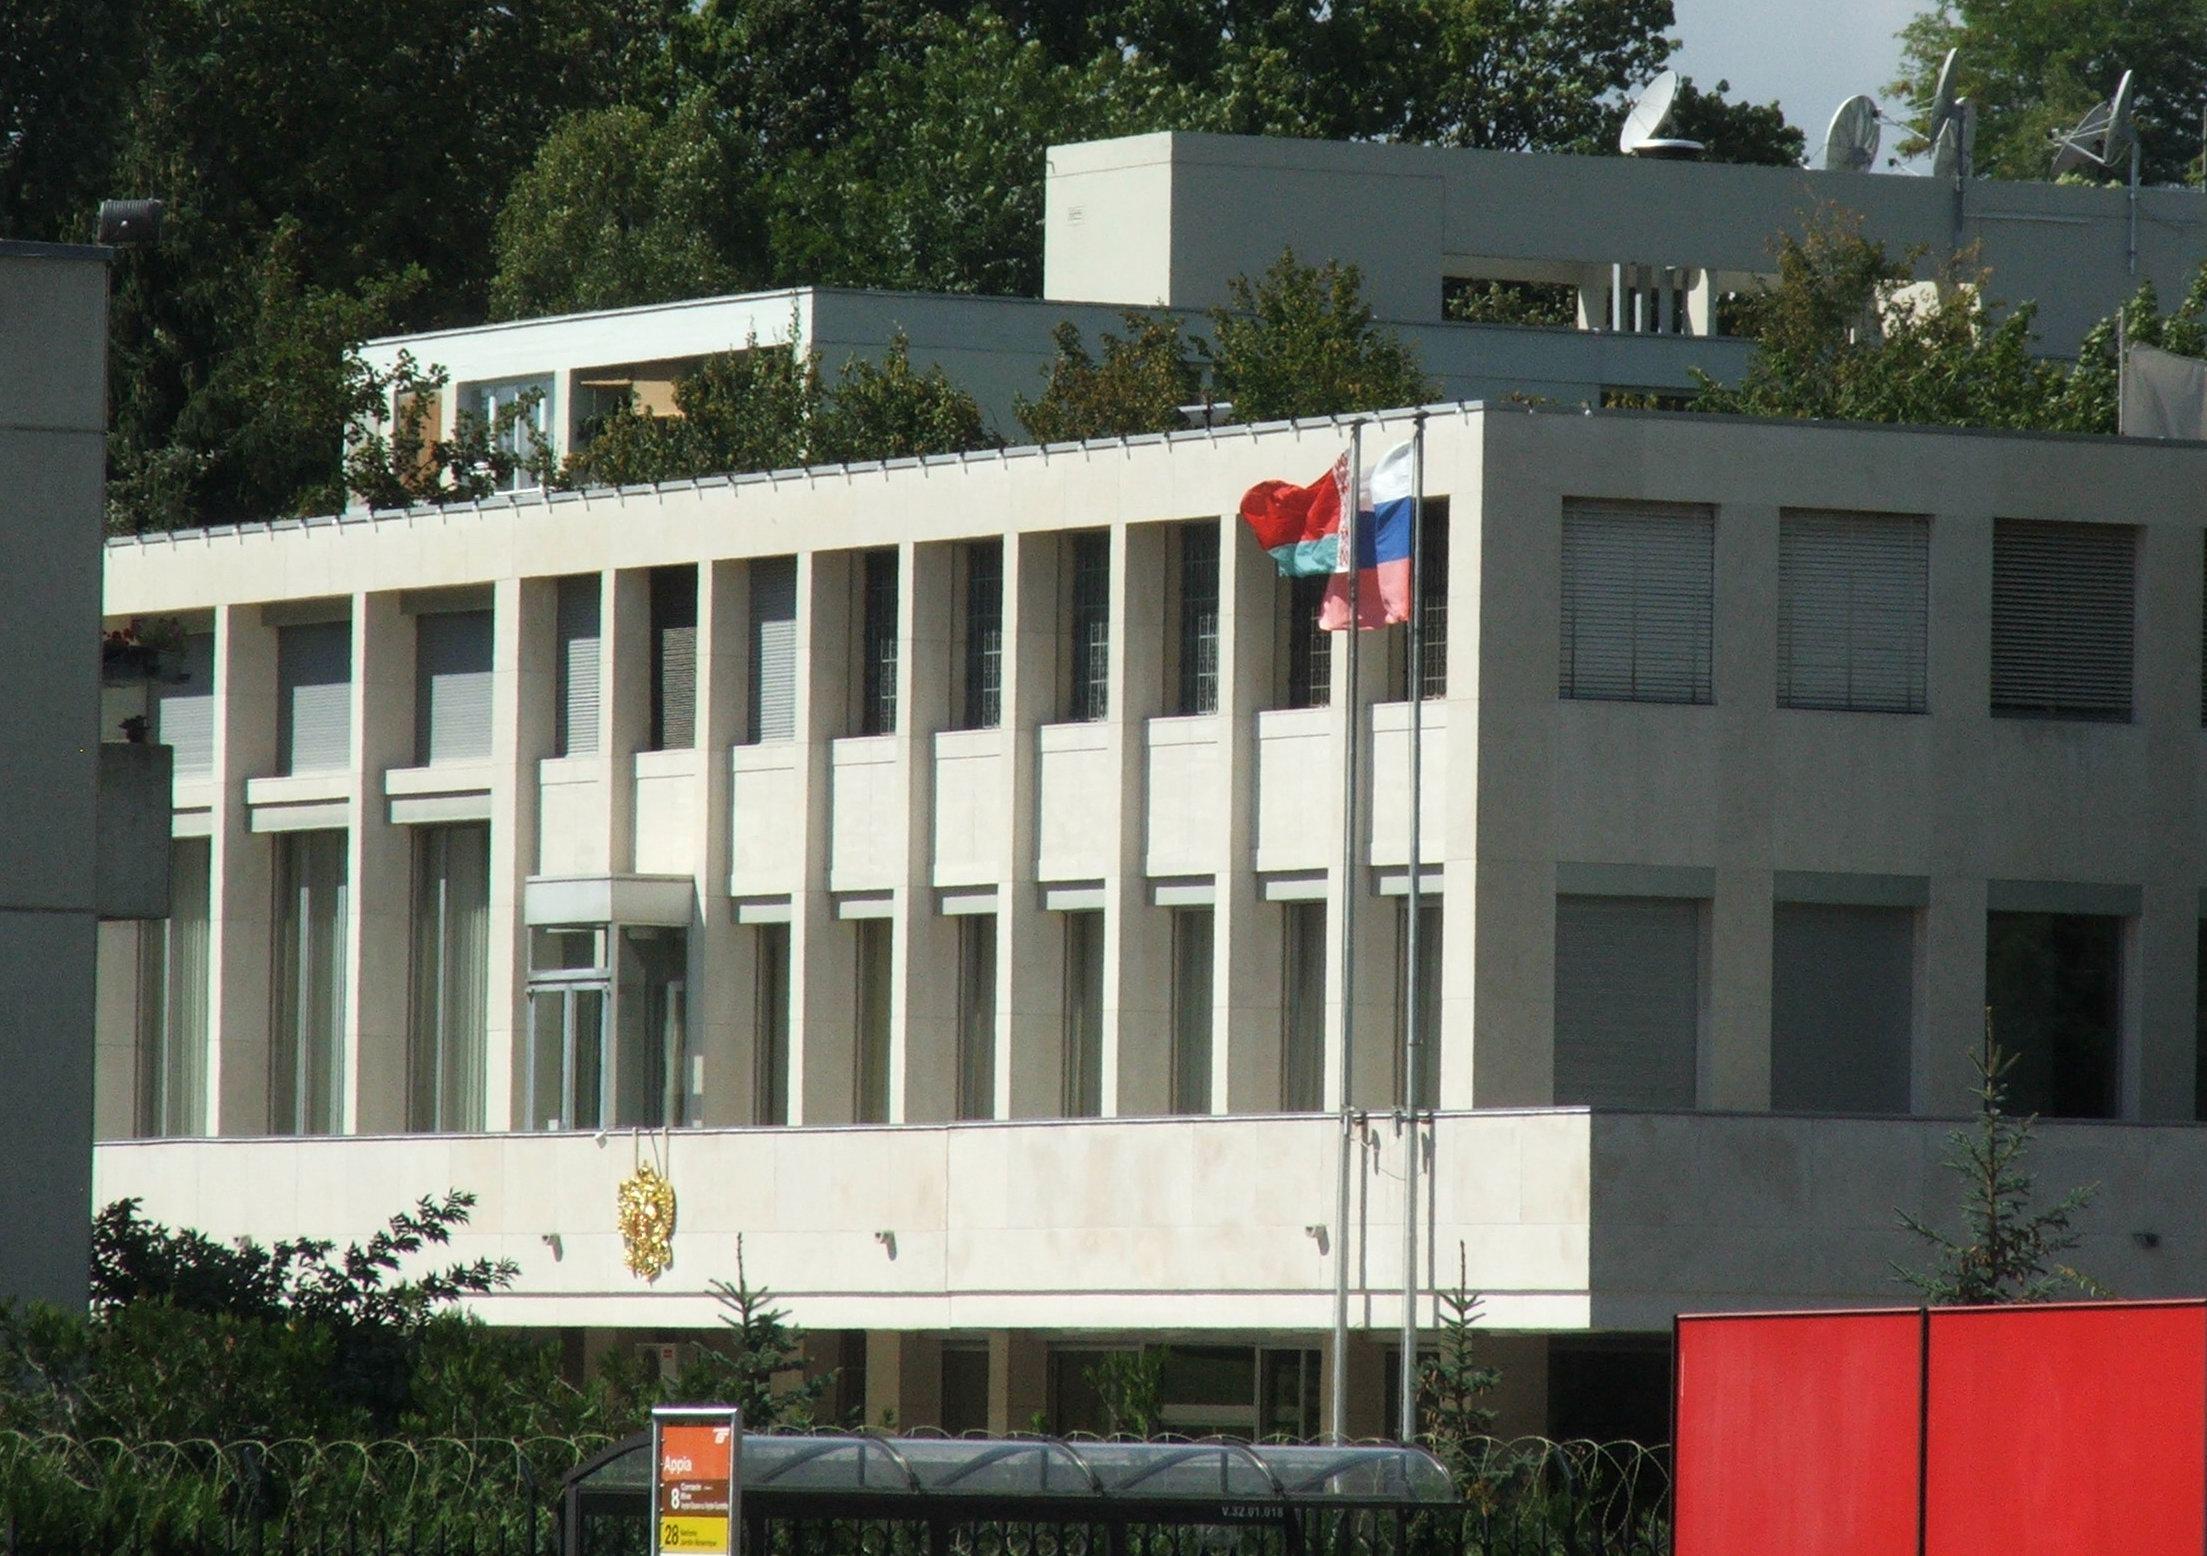 The Permanent Mission of the Russian Federation in Geneva